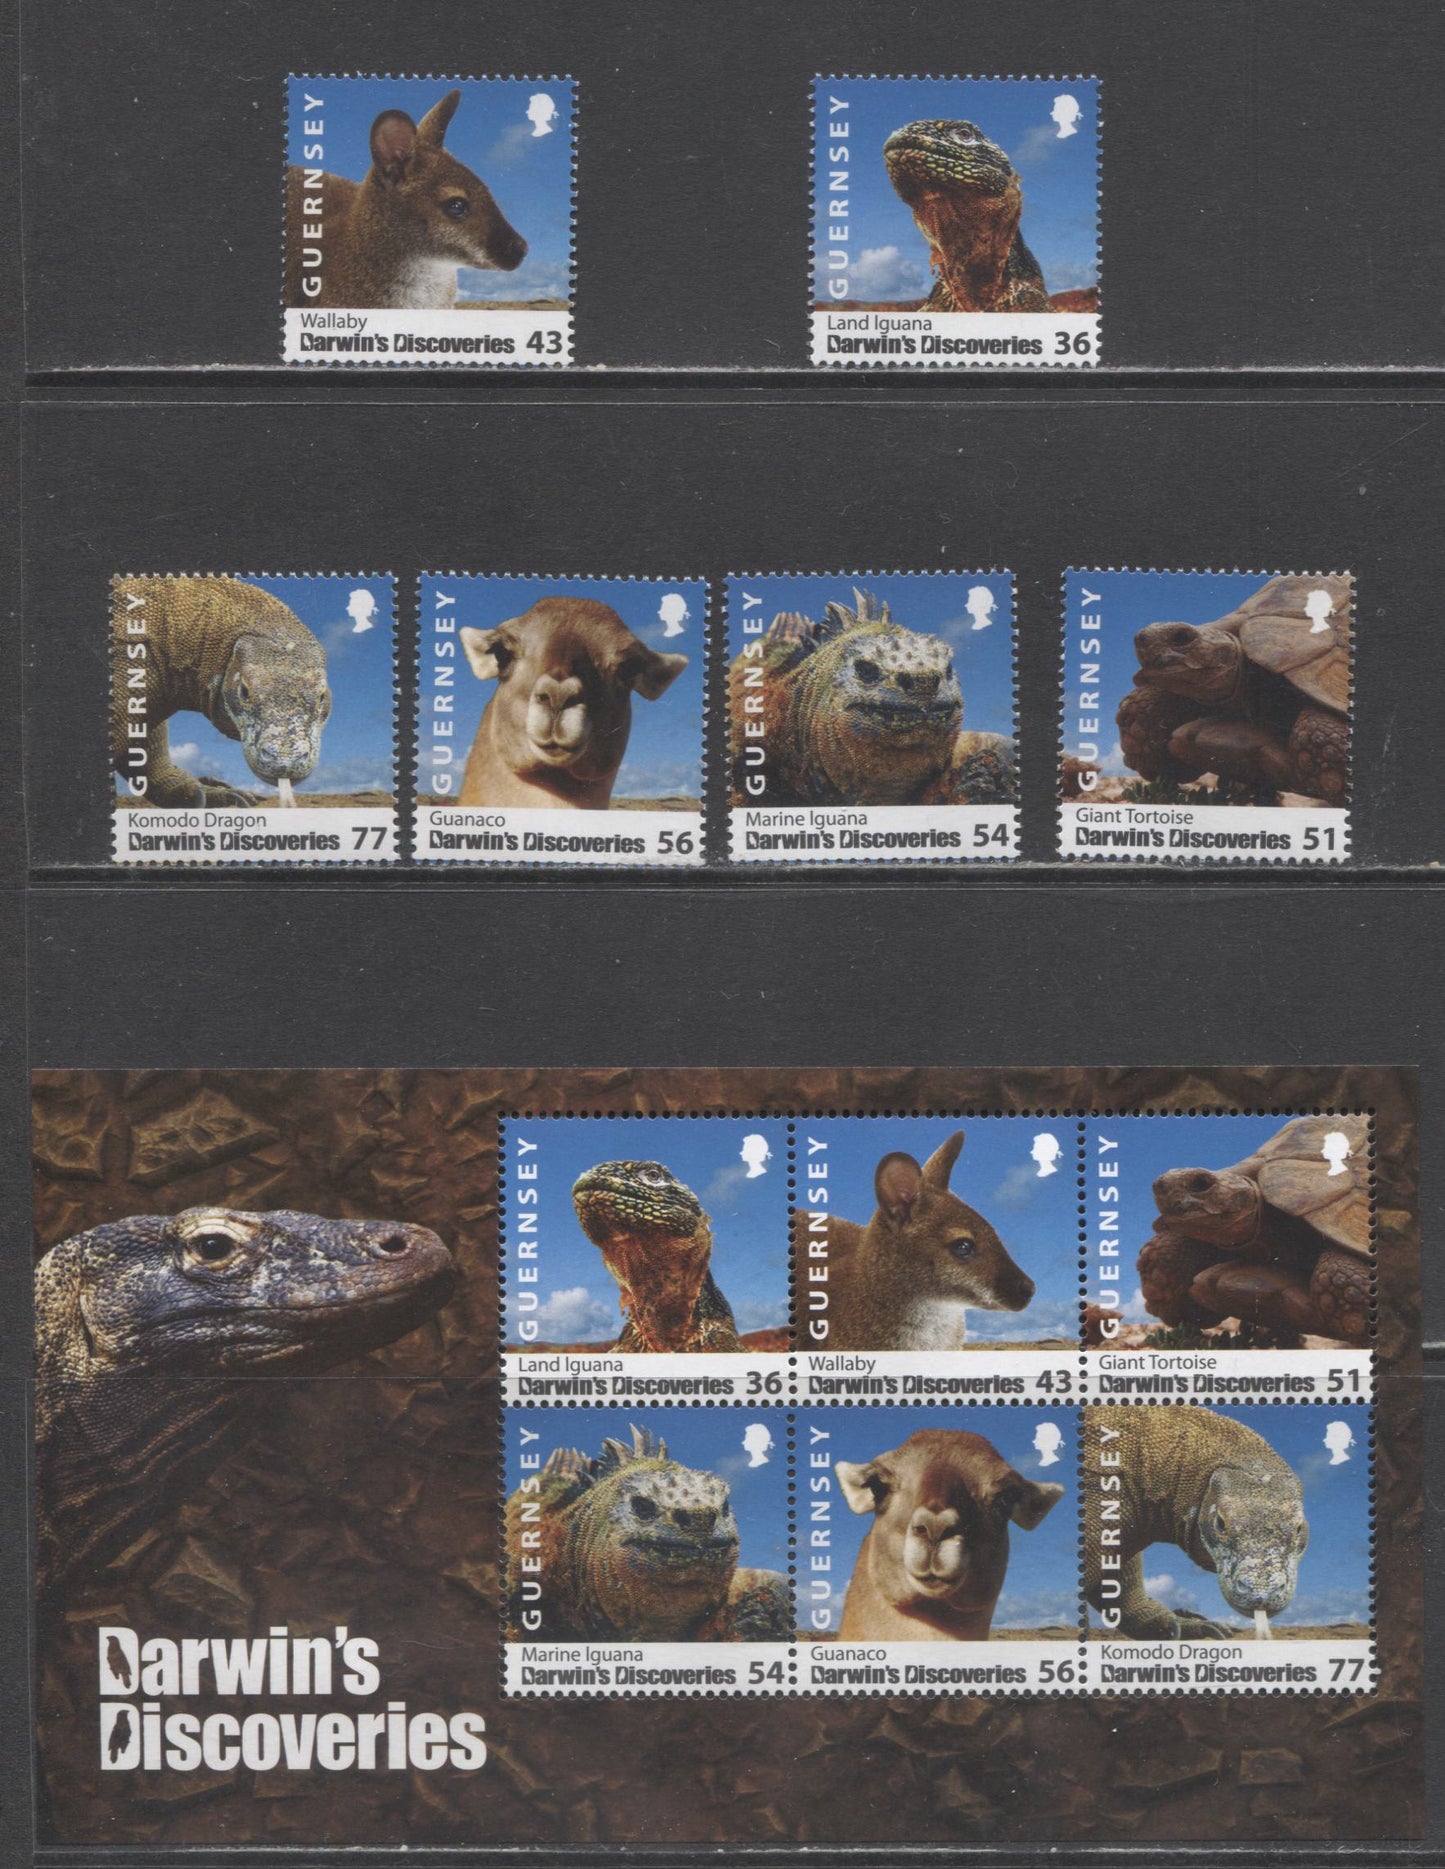 Lot 32 Great Britain - Guernsey SC#1022-1027a 2009 Darwin's Discoveries Issue, 7 VFNH Singles & Souvenir Sheet, Click on Listing to See ALL Pictures, 2017 Scott Cat. $18.8